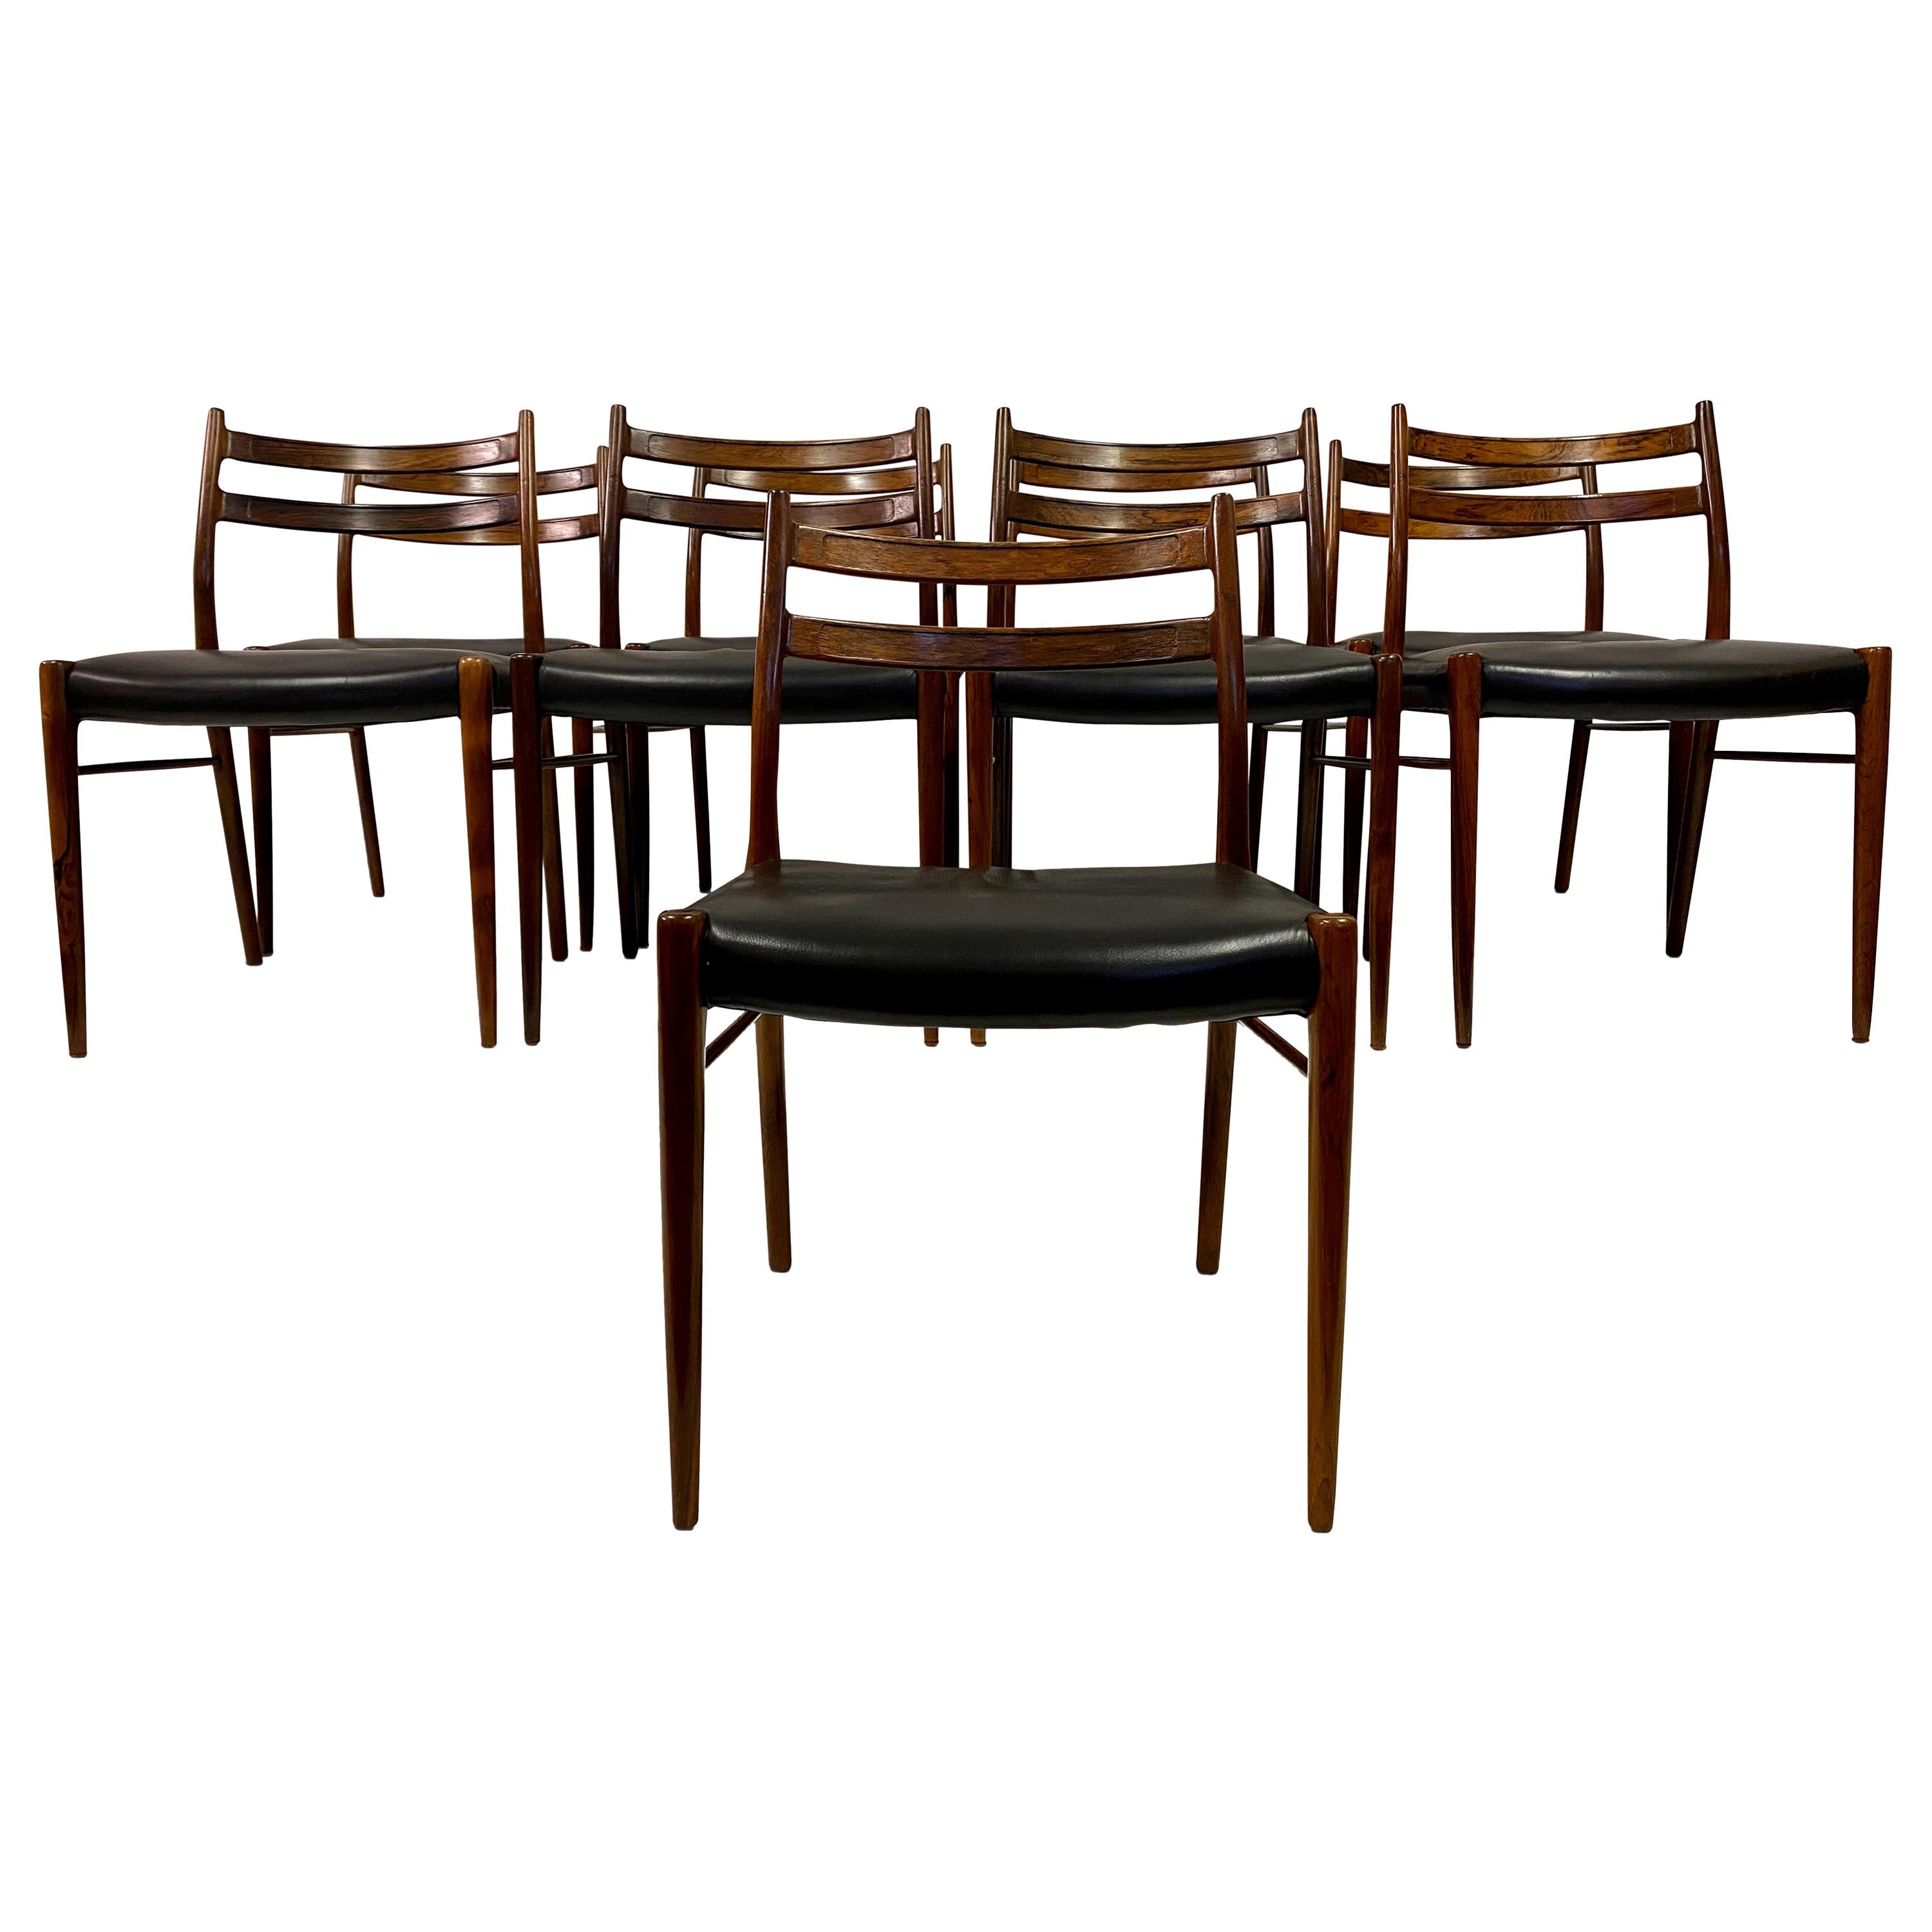 Set of Nine 1960s Danish Rosewood Dining Chairs by Glyngøre Stolefabrik